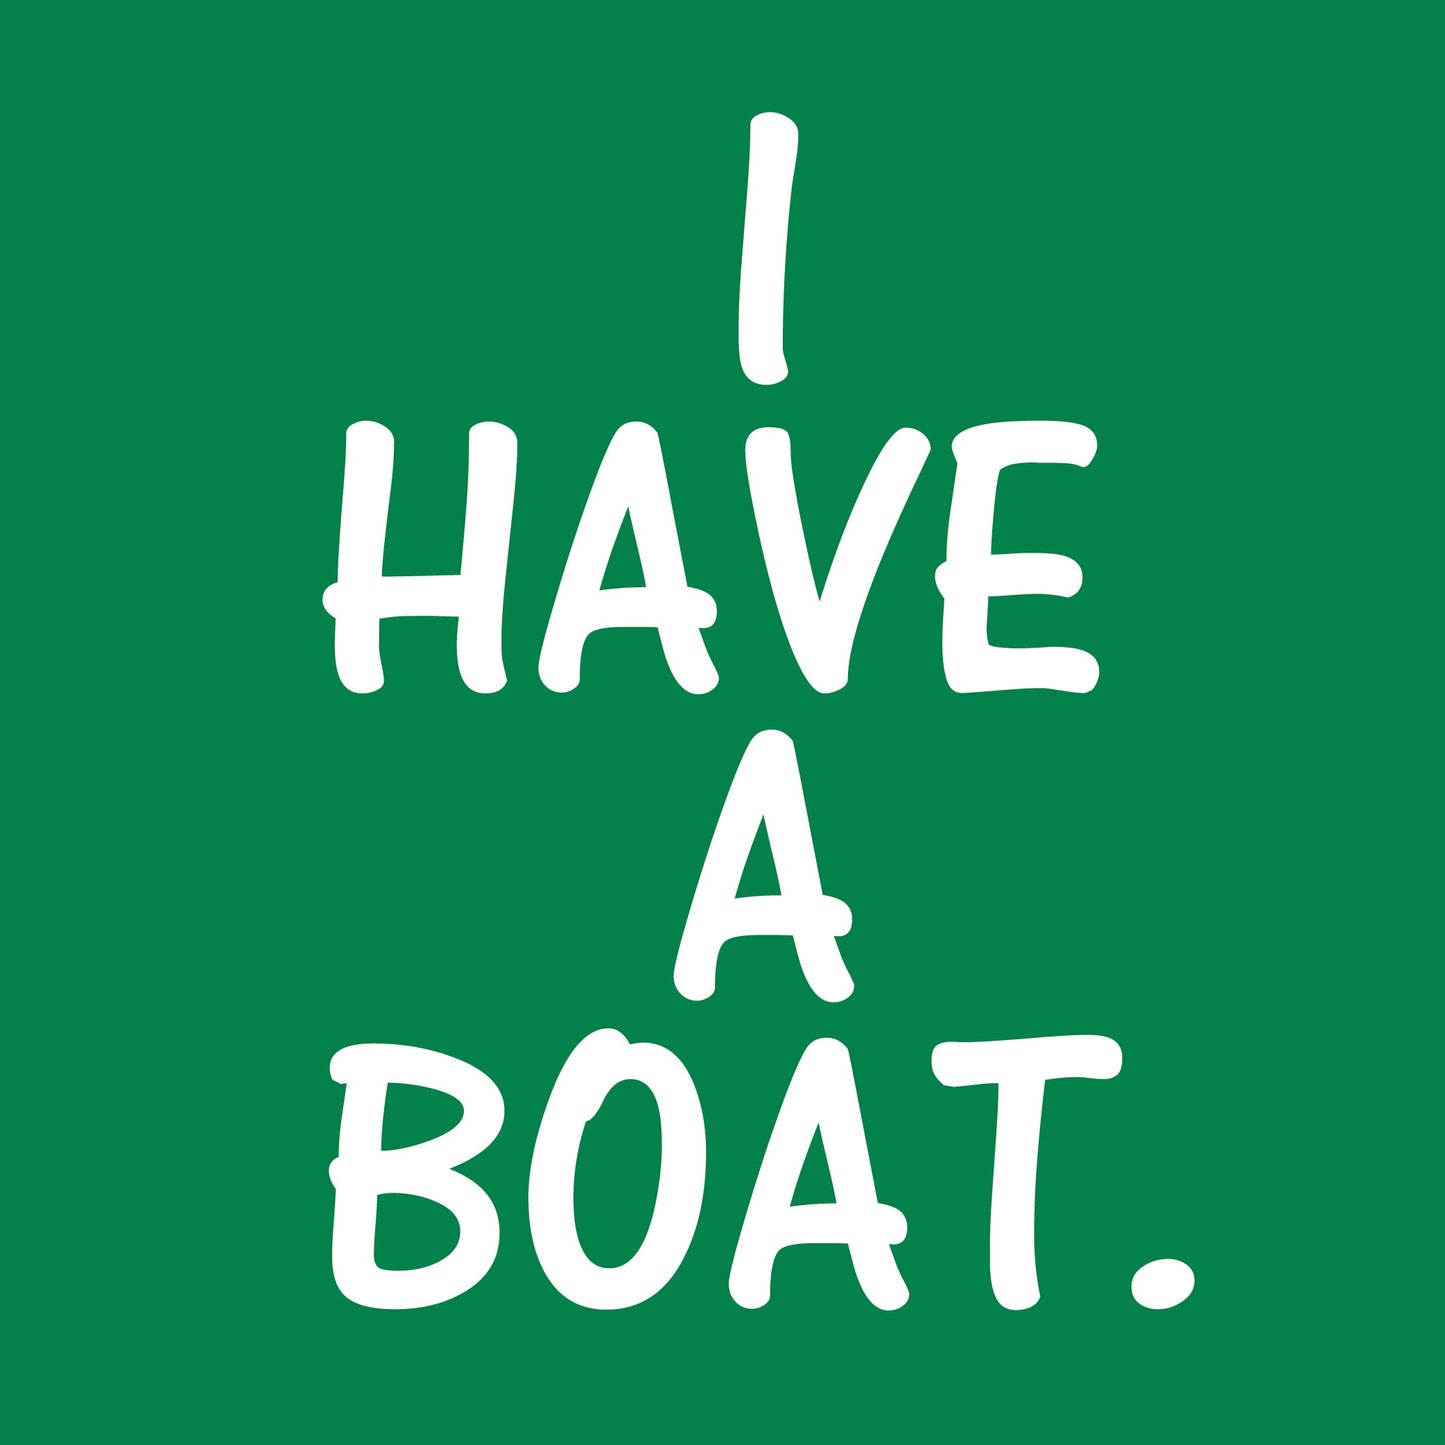 I have a boat